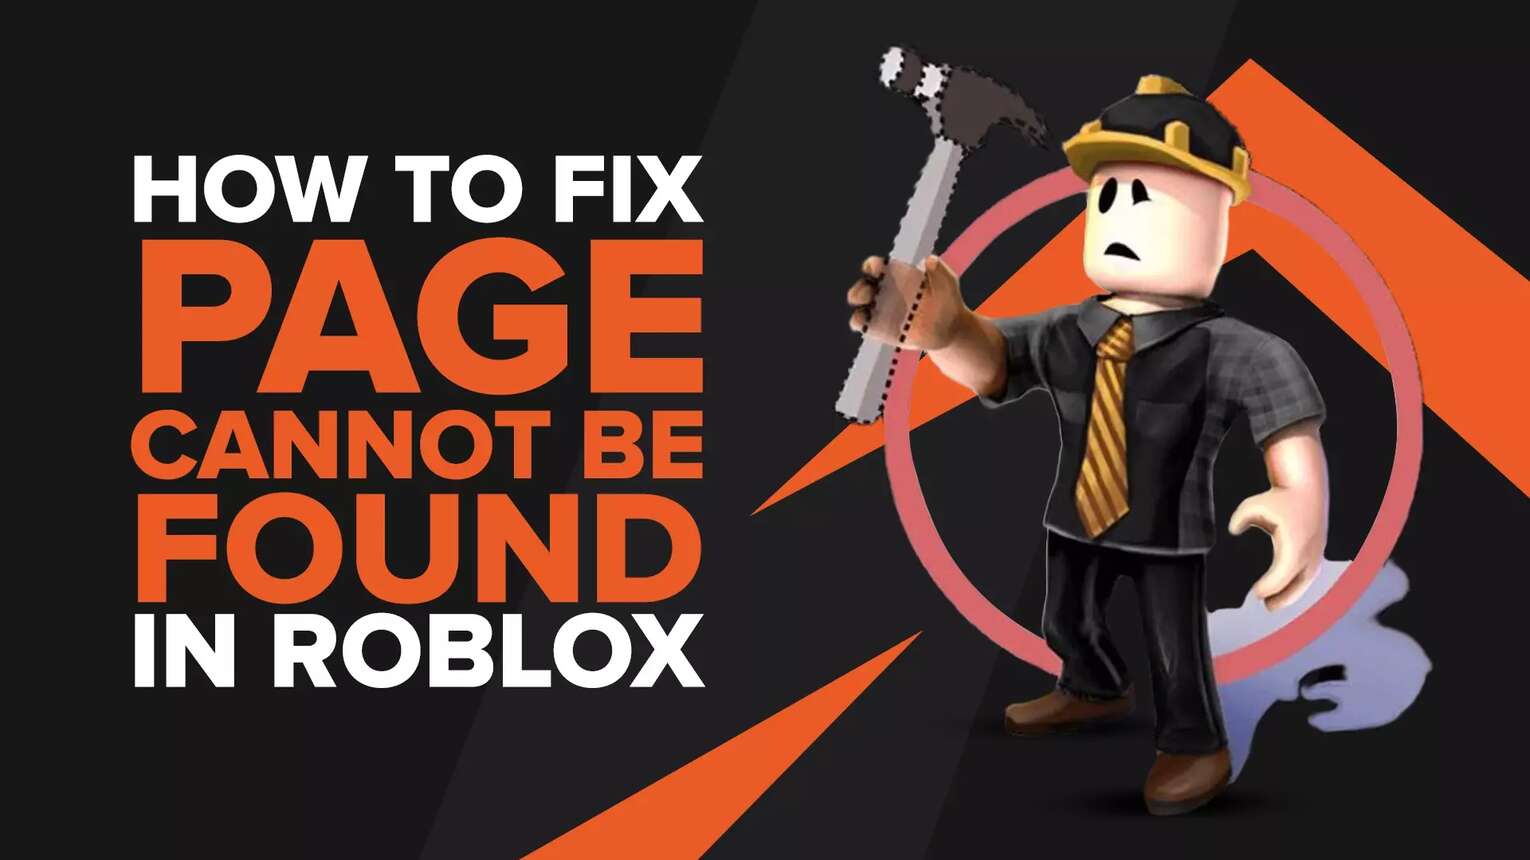 [Fixed] Roblox Page Cannot Be Found or No Longer Exist: How to fix